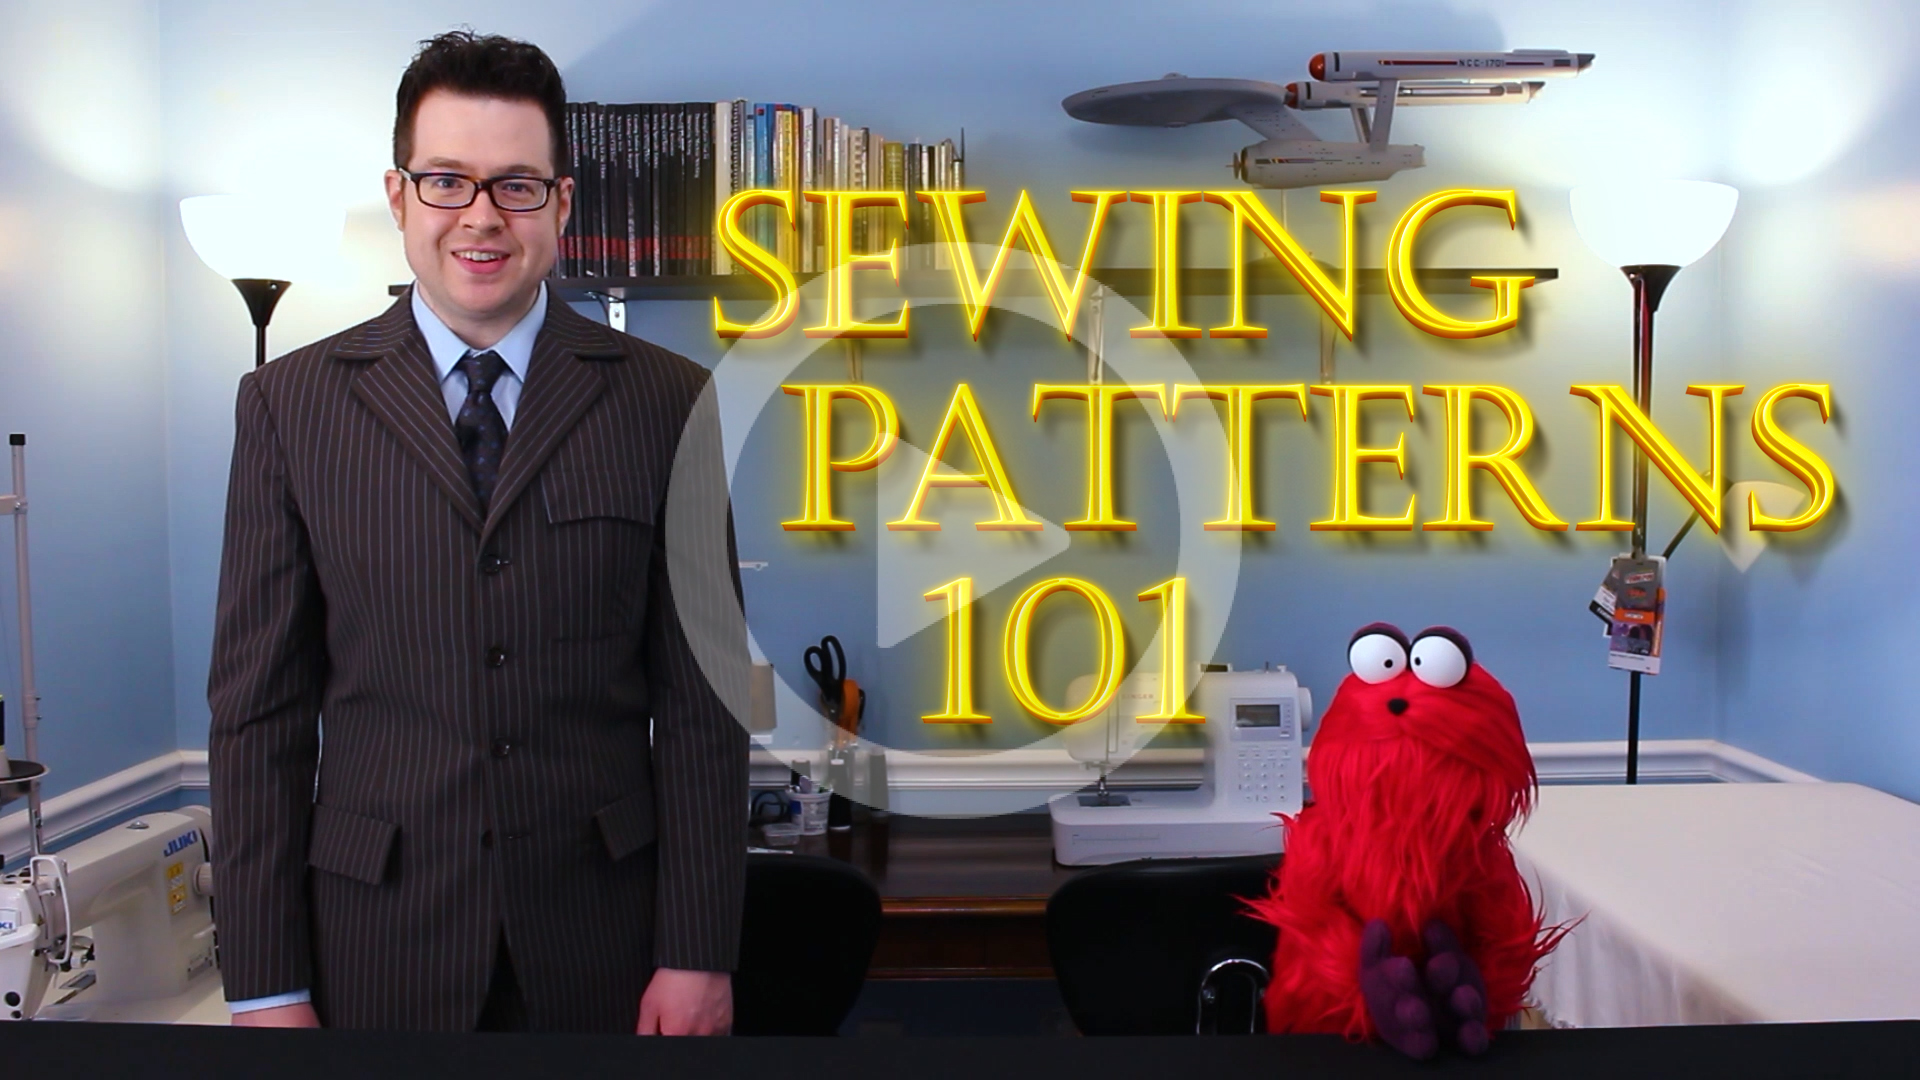 Sewing Patterns 101 - Free Sewing Lesson - Tailors Gone Wild